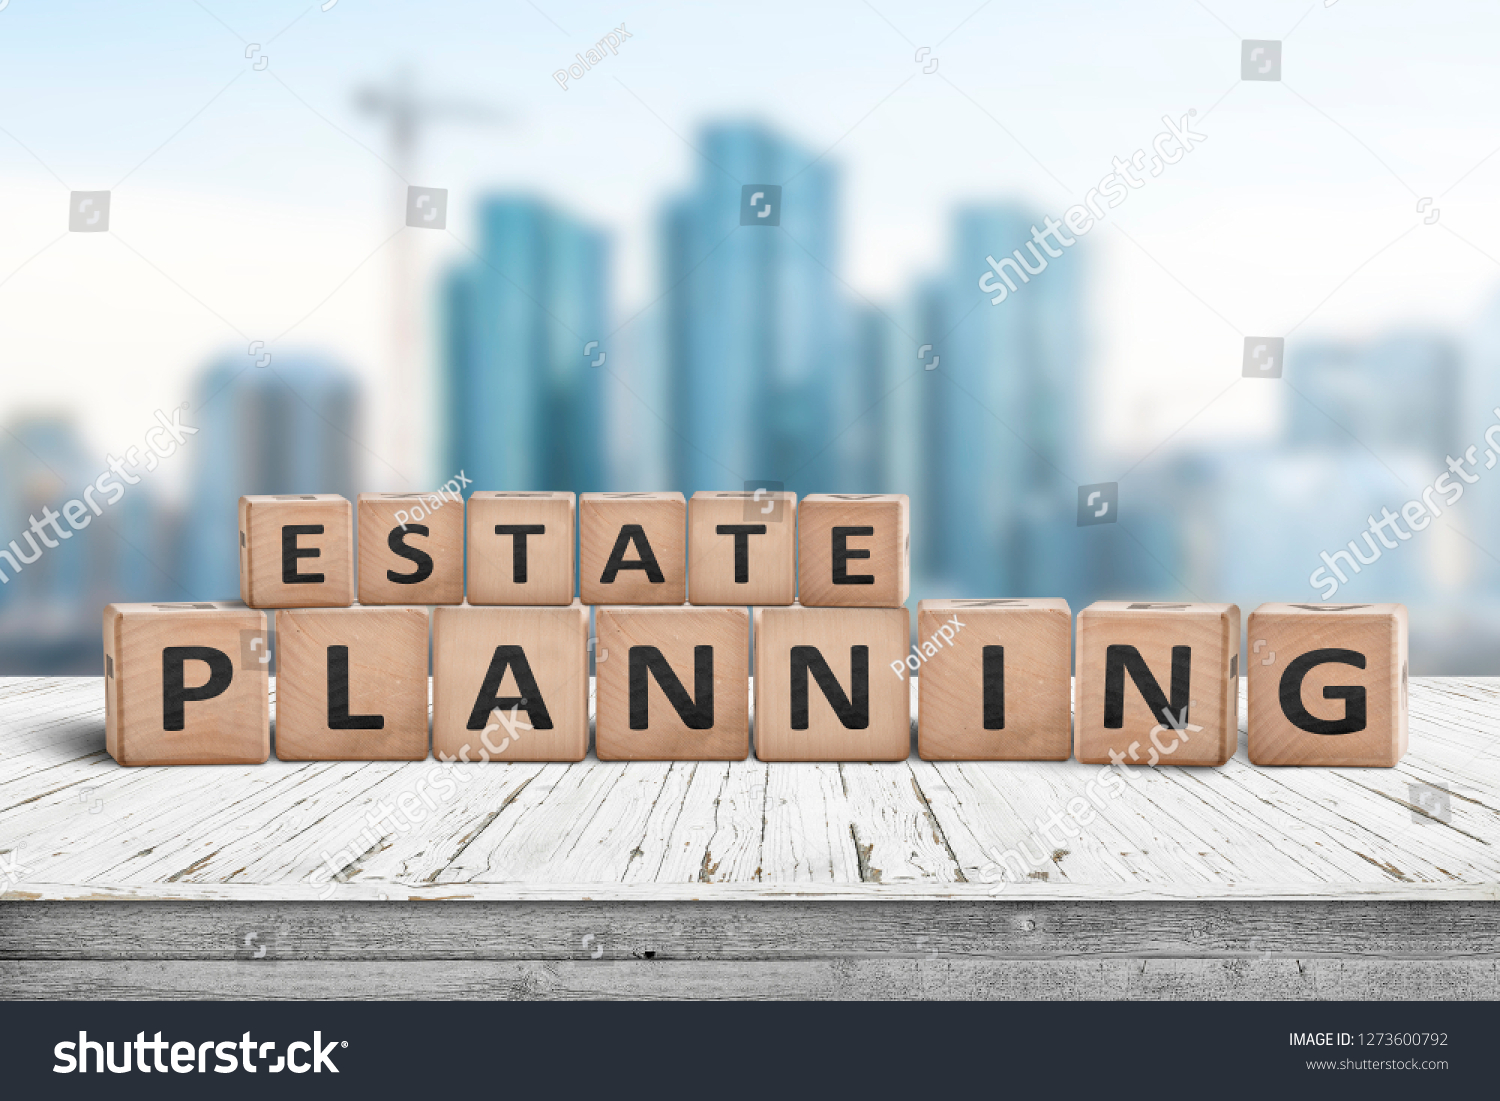 Estate planning sign on a wooden pier with tall buildings in the background #1273600792